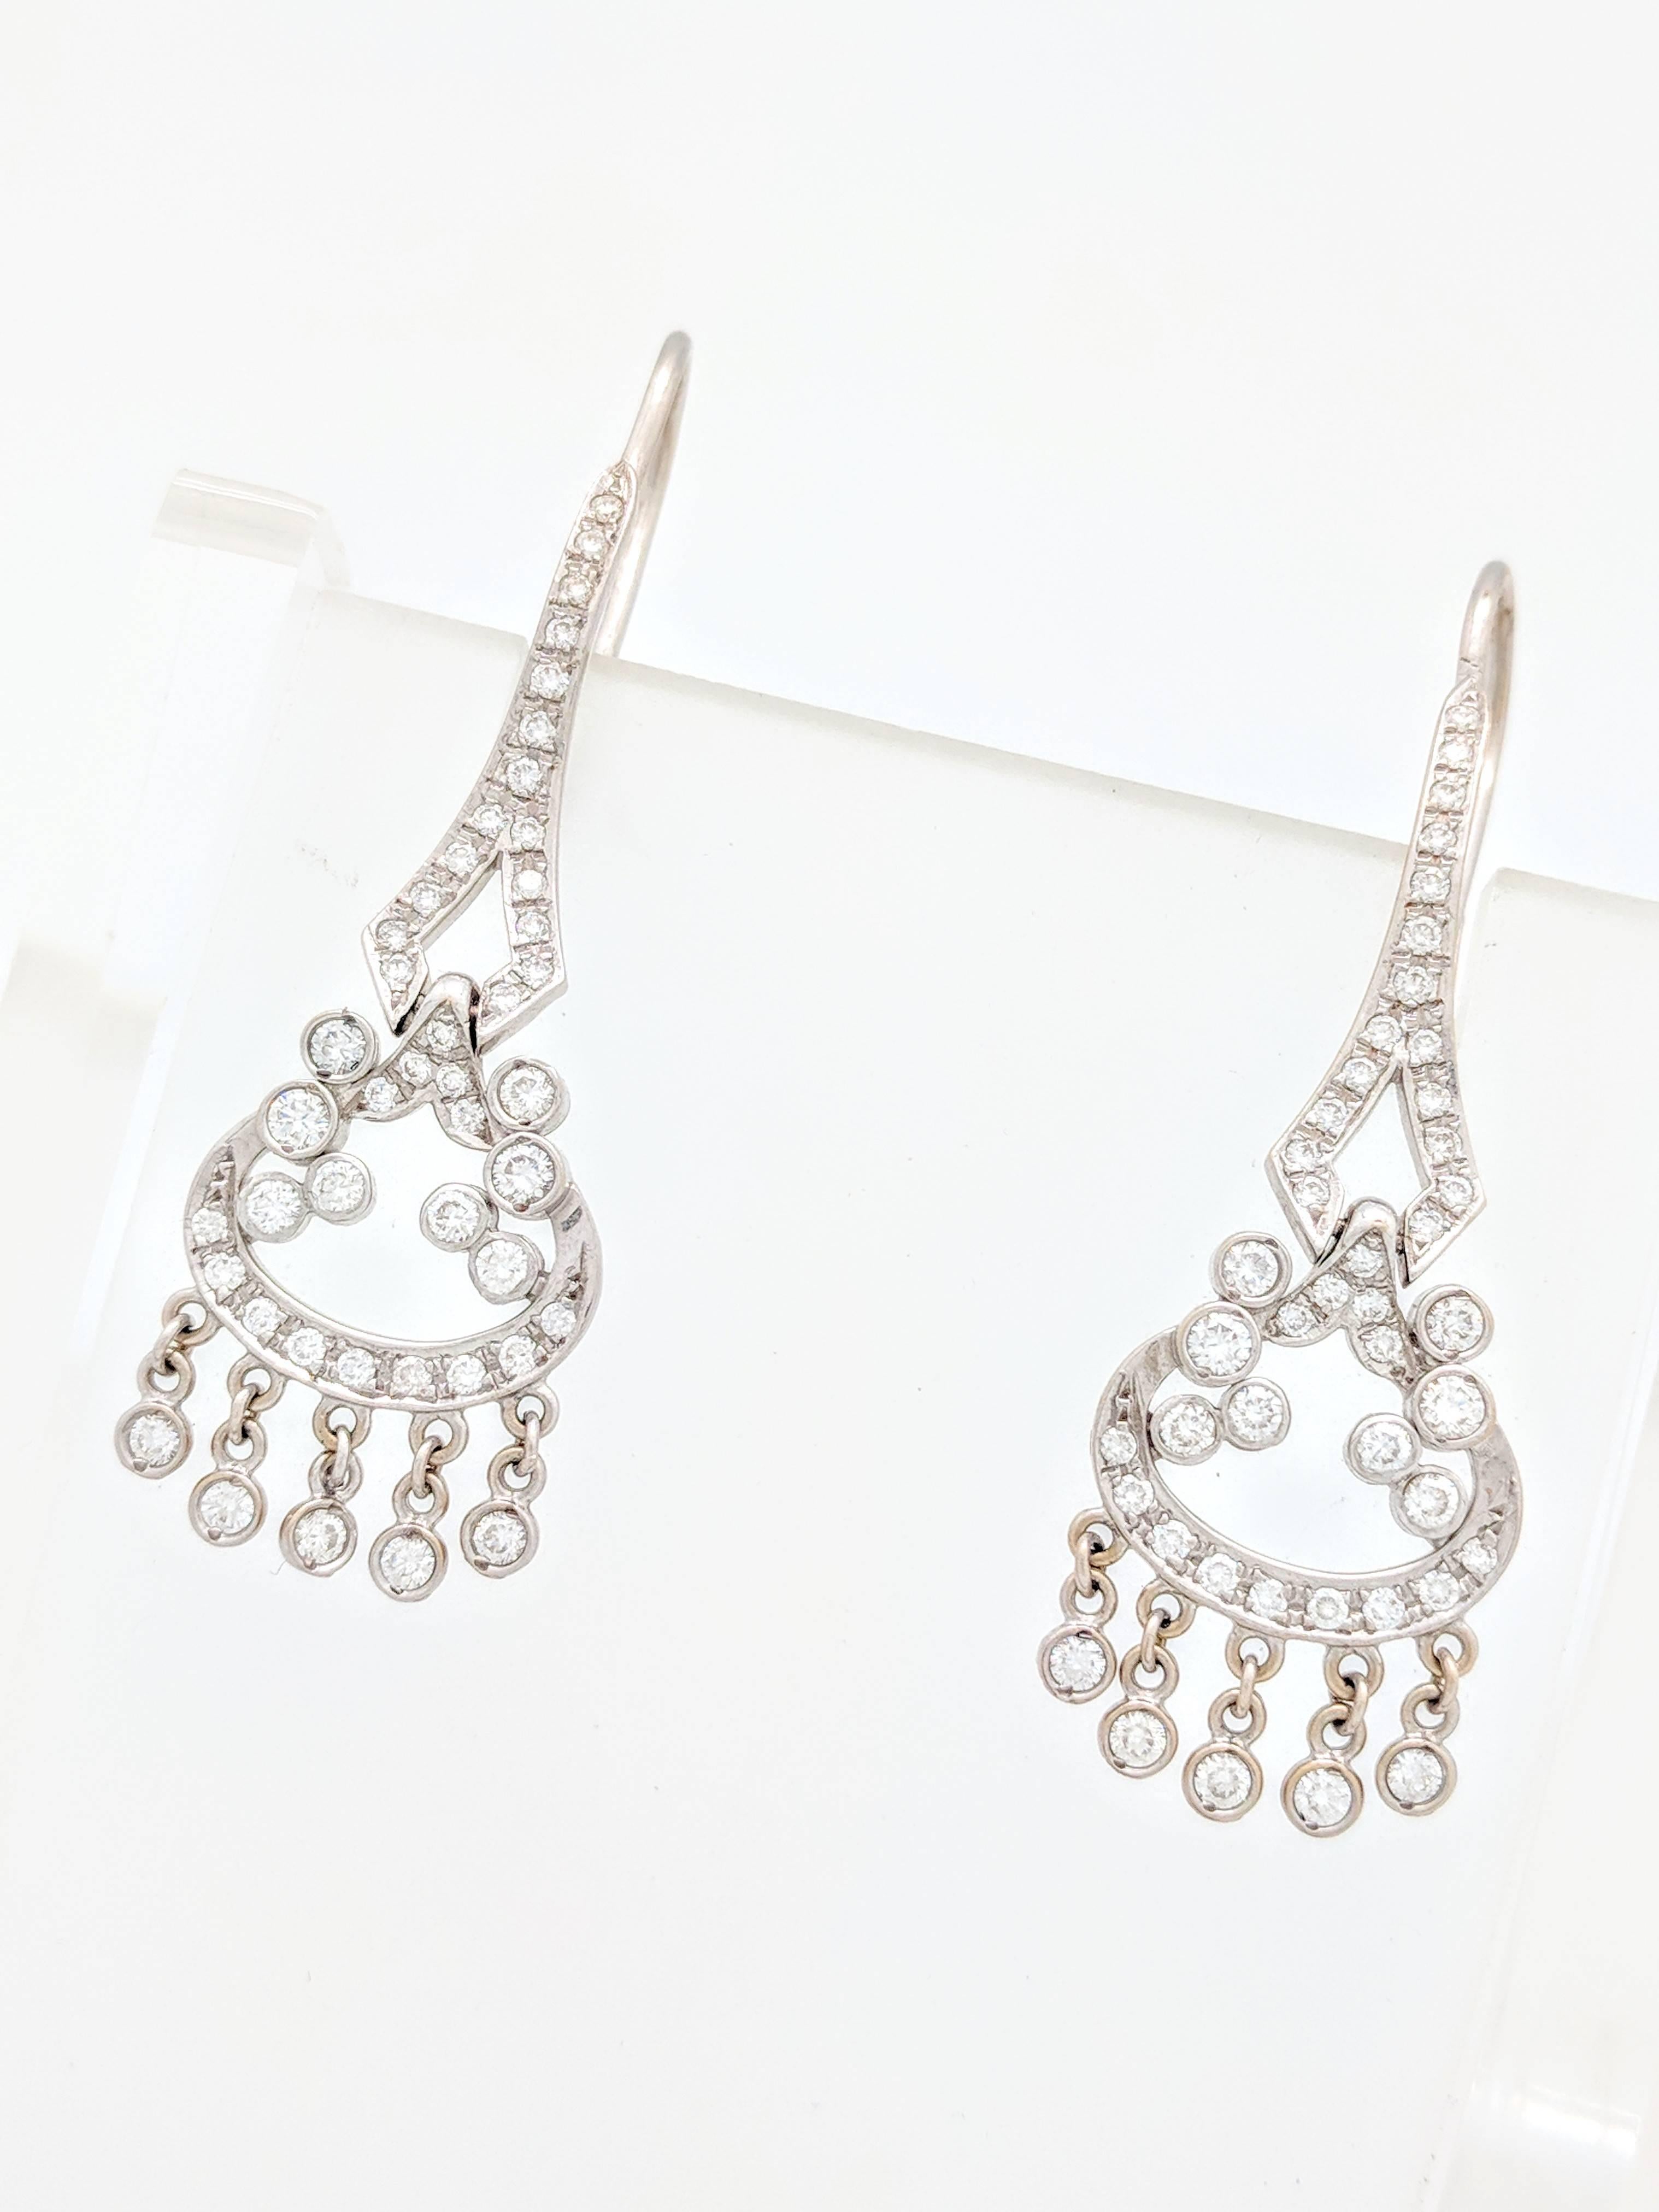 14K White Gold 1.50ctw Round Brilliant Diamond Chandelier Earrings SI2,G

You are viewing a pair of gorgeous chandelier diamond earrings. Any woman would love to add these beauties to their collection!! These earrings are crafted from 14k white